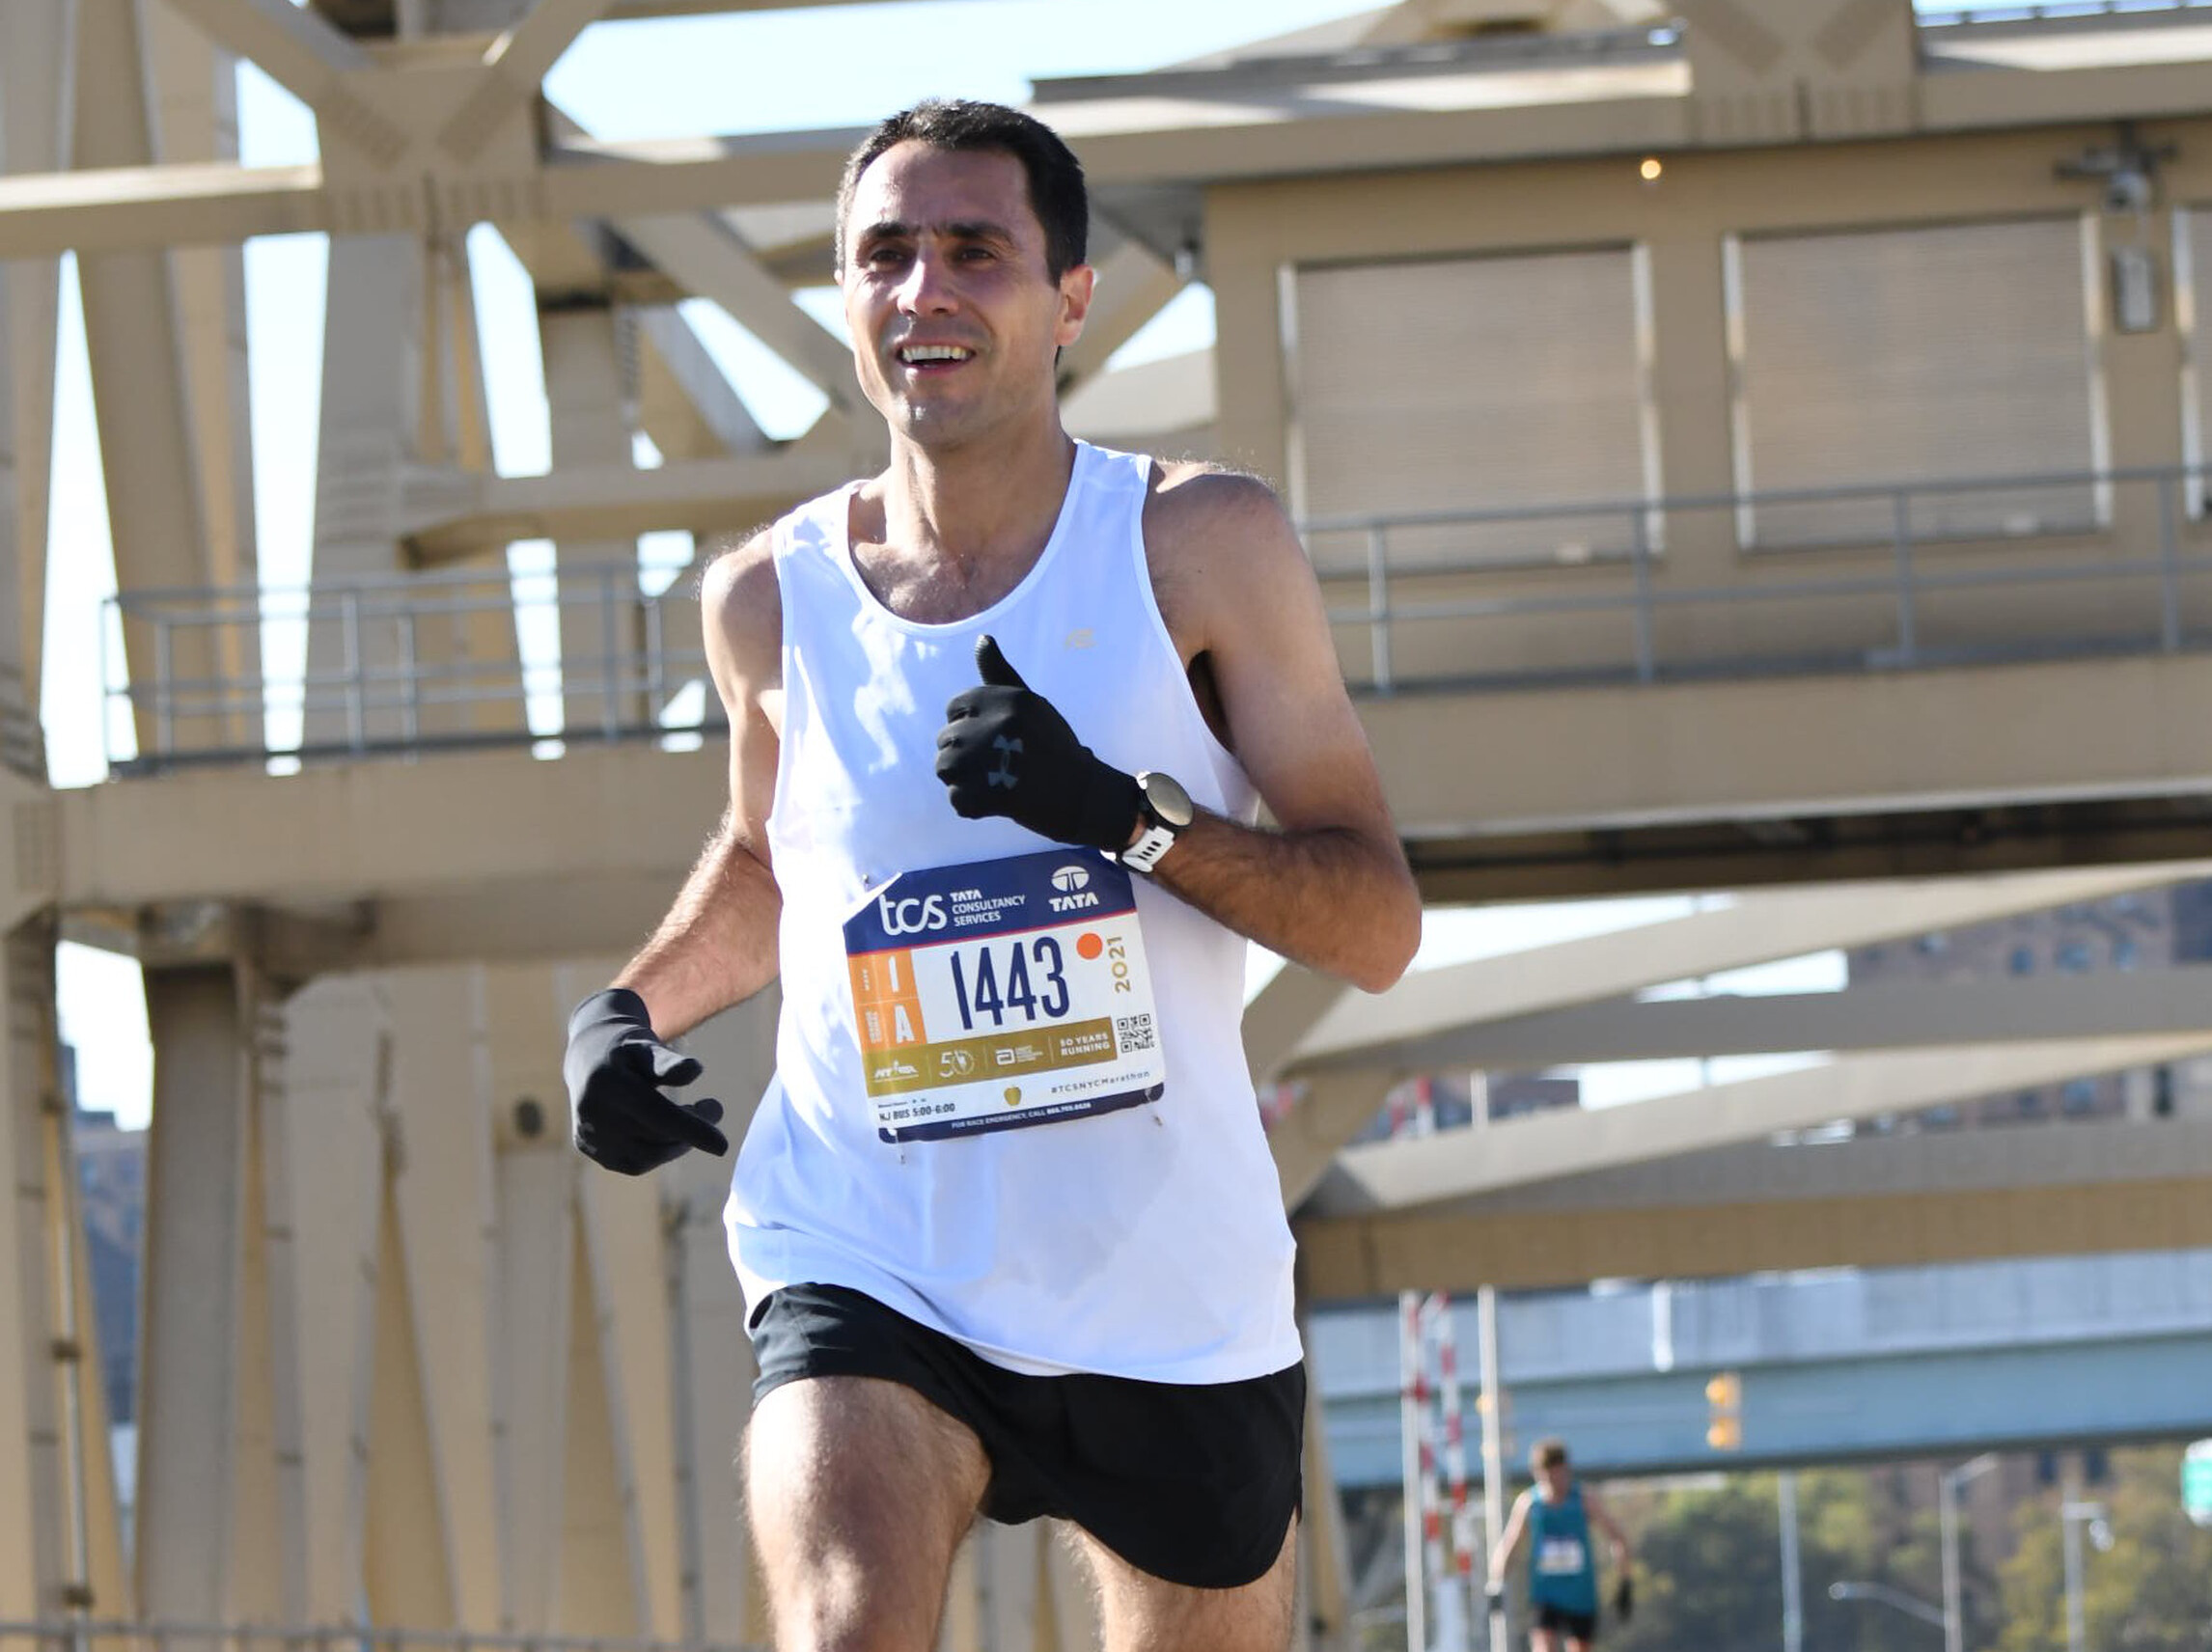 Father Manuel Duenas, a priest of the Archdiocese of Newark and current vice-rector of Redemptoris Mater Seminary in Kearny, N.J., was among 33,000 participants in Sunday’s New York City marathon. He posted a personal best marathon time of 2 hours and 55 minutes, and 55 seconds. (Photo courtesy of Father Manuel Duenas)